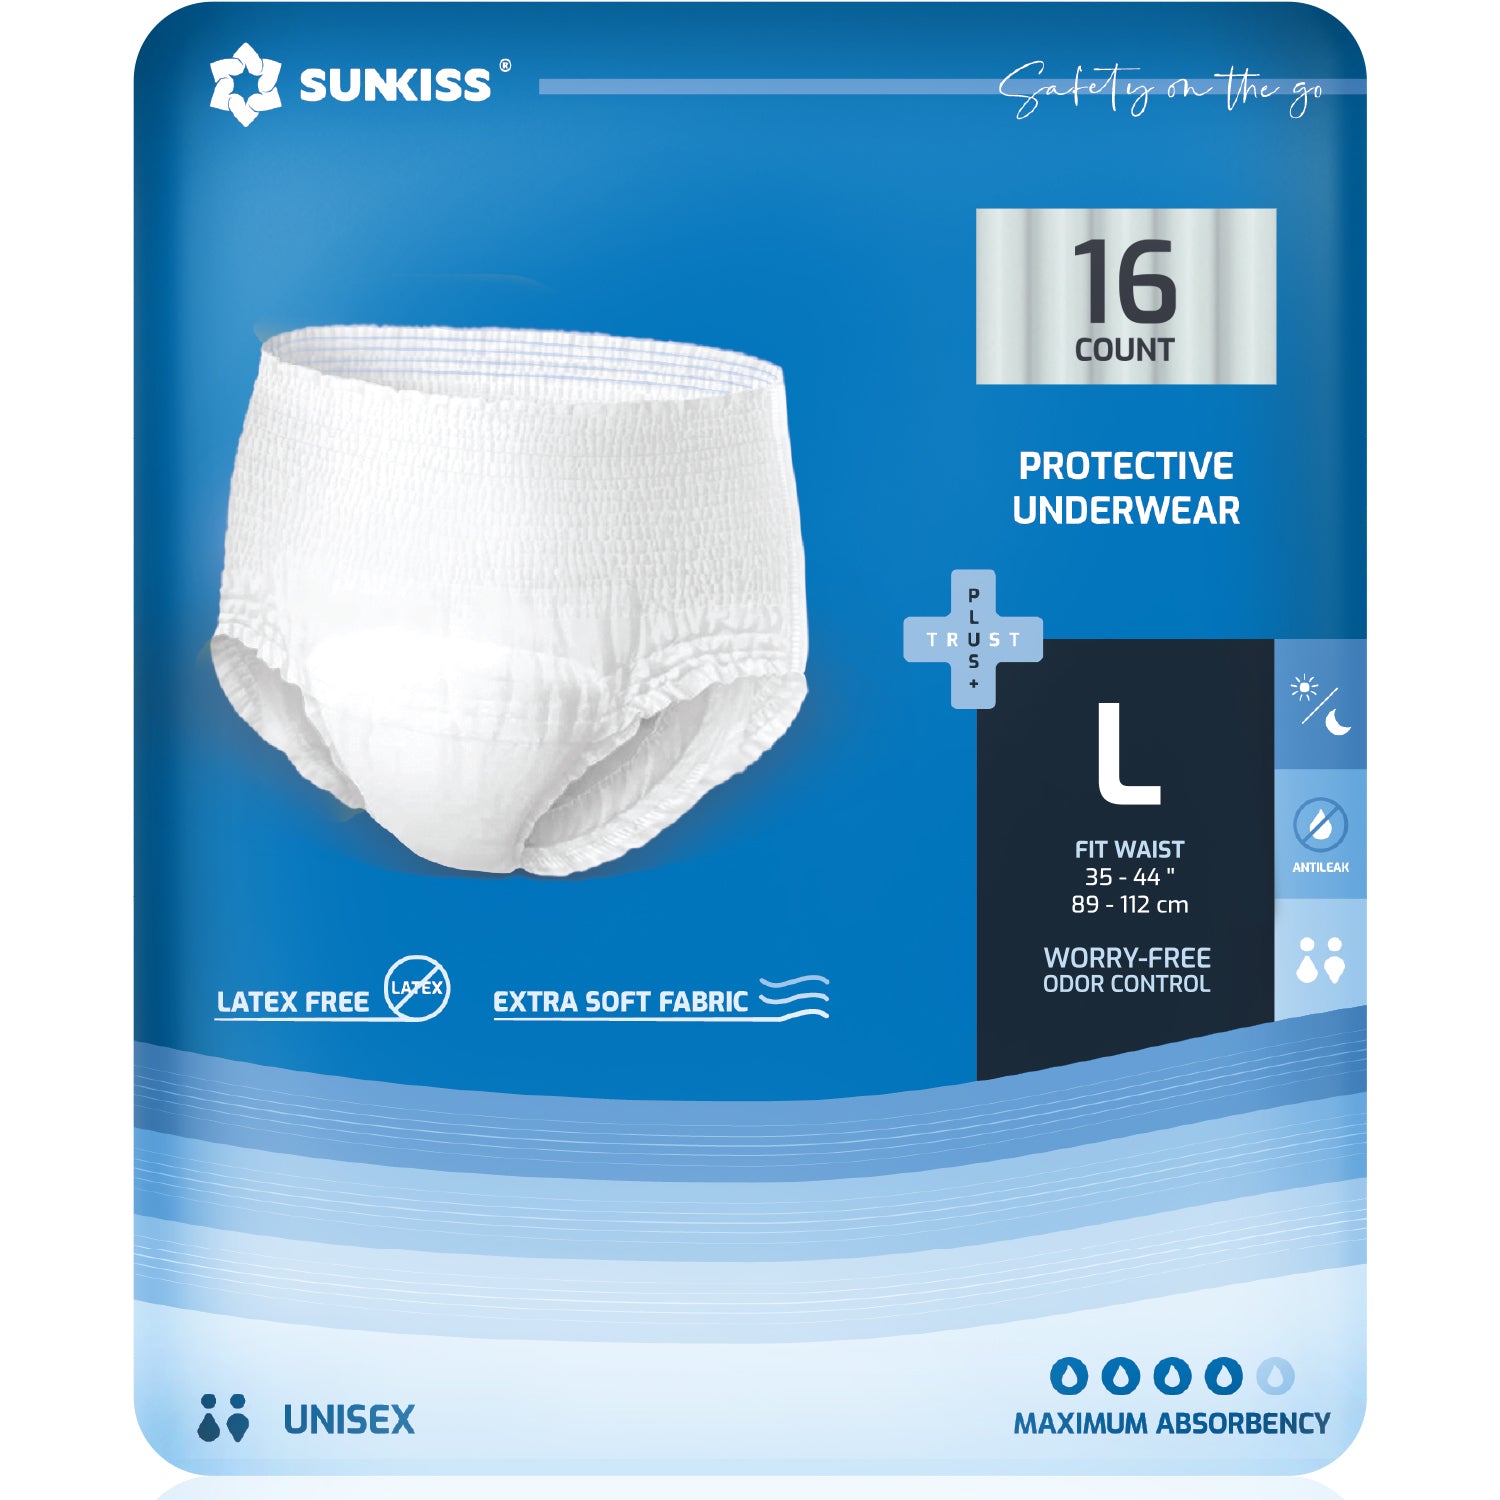 SUNKISS TrustPlus+ Unisex Protective Underwear with Maximum Absorbency